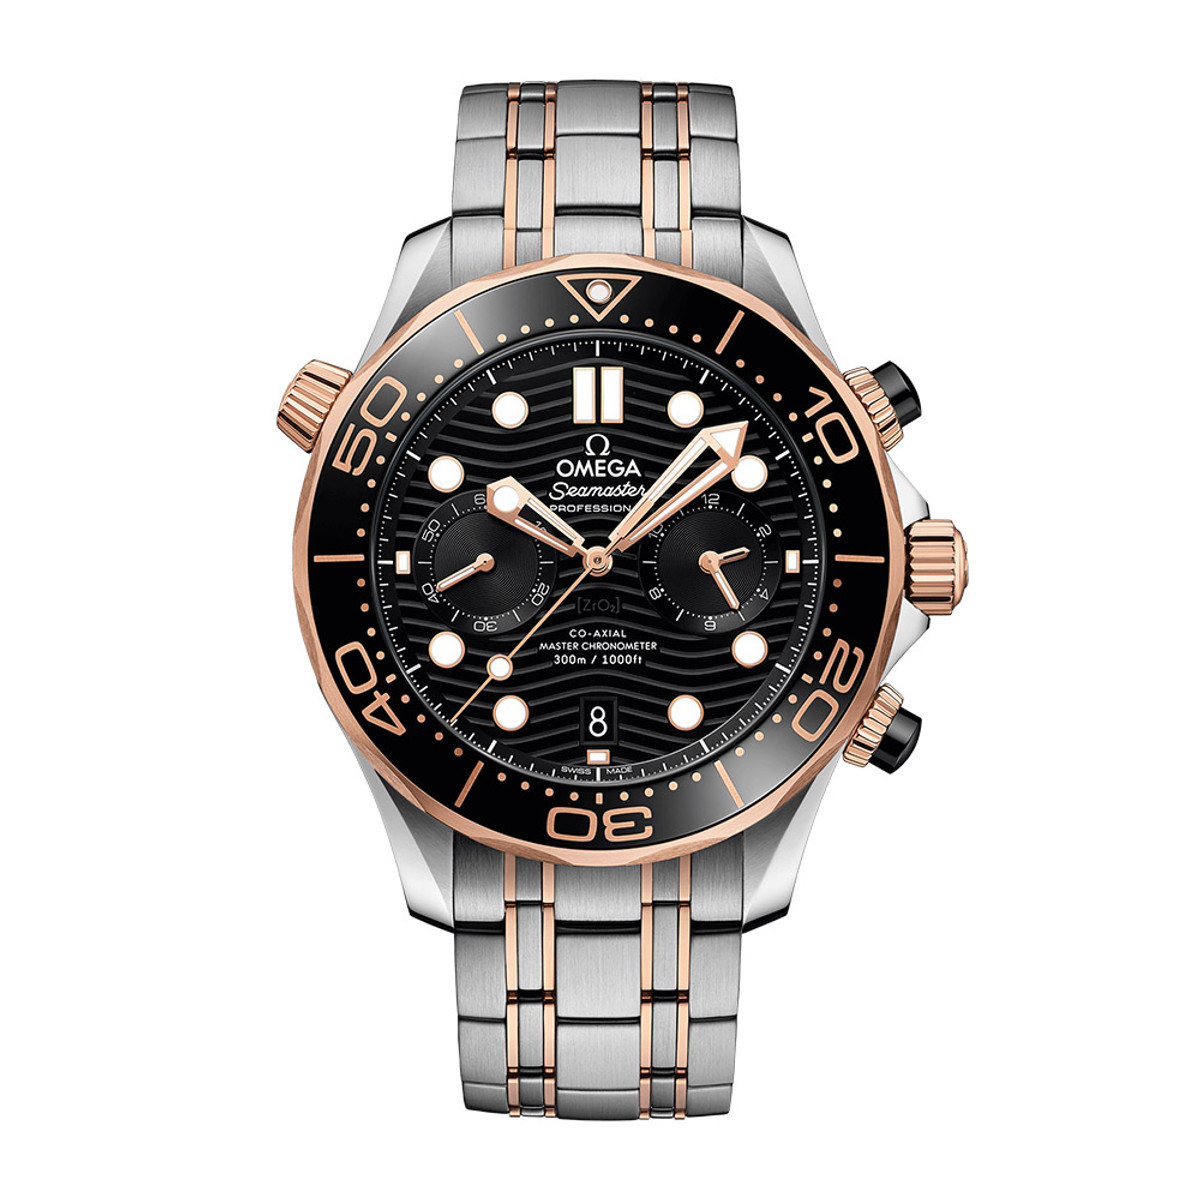 Omega Seamaster Diver 300M Chronograph 18K Sedna Gold & Steel 44mm 210.20.44.51.01.001-WOMG0888 Product Image